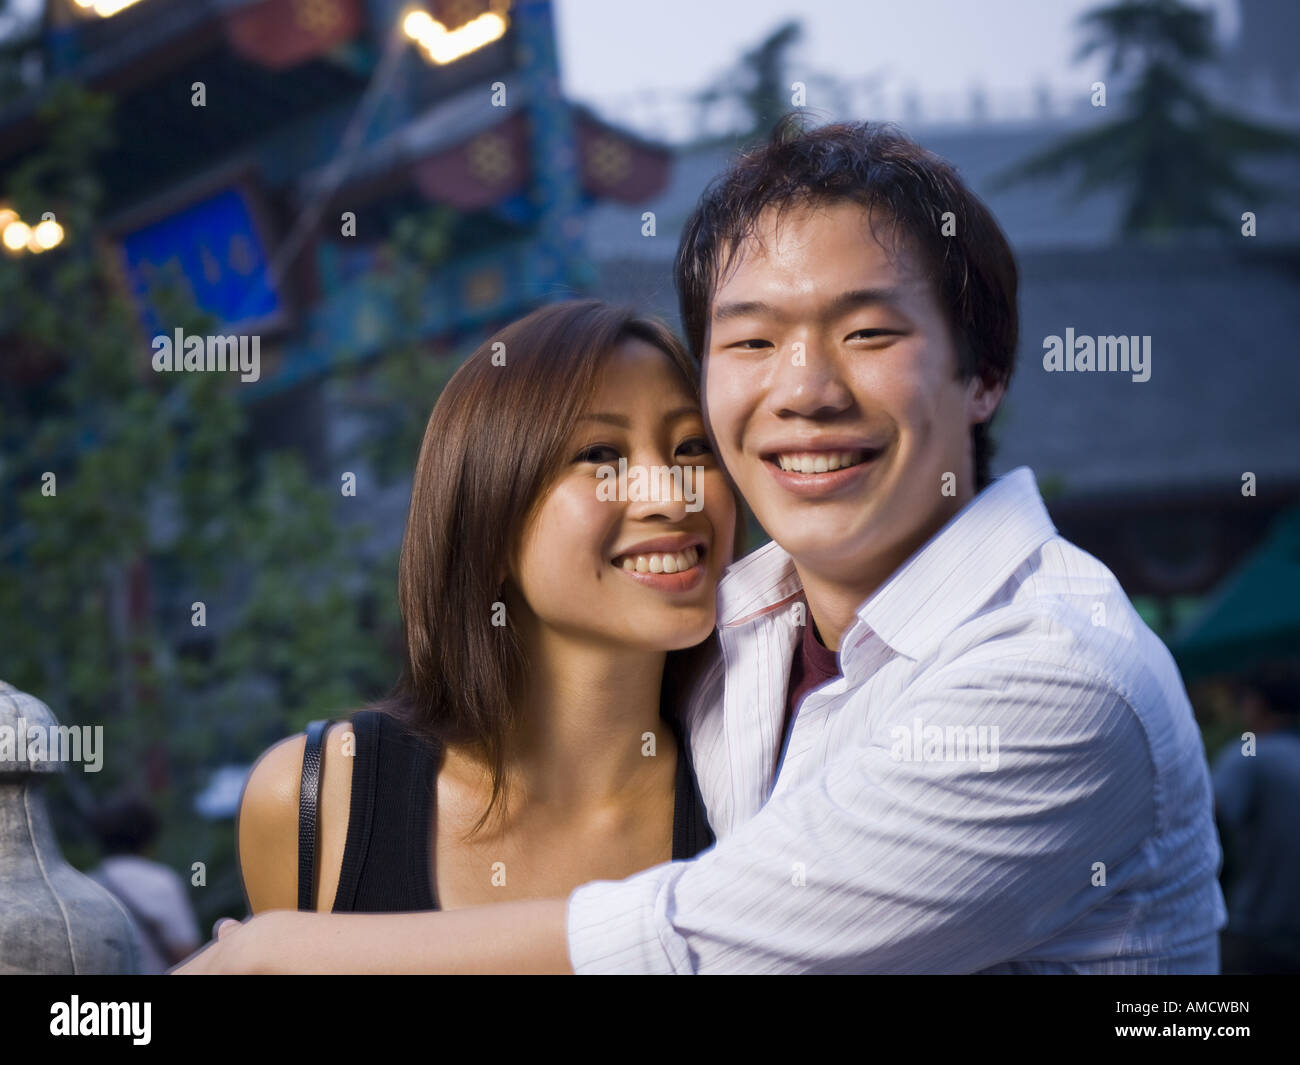 Couple embracing and smiling outdoors Stock Photo